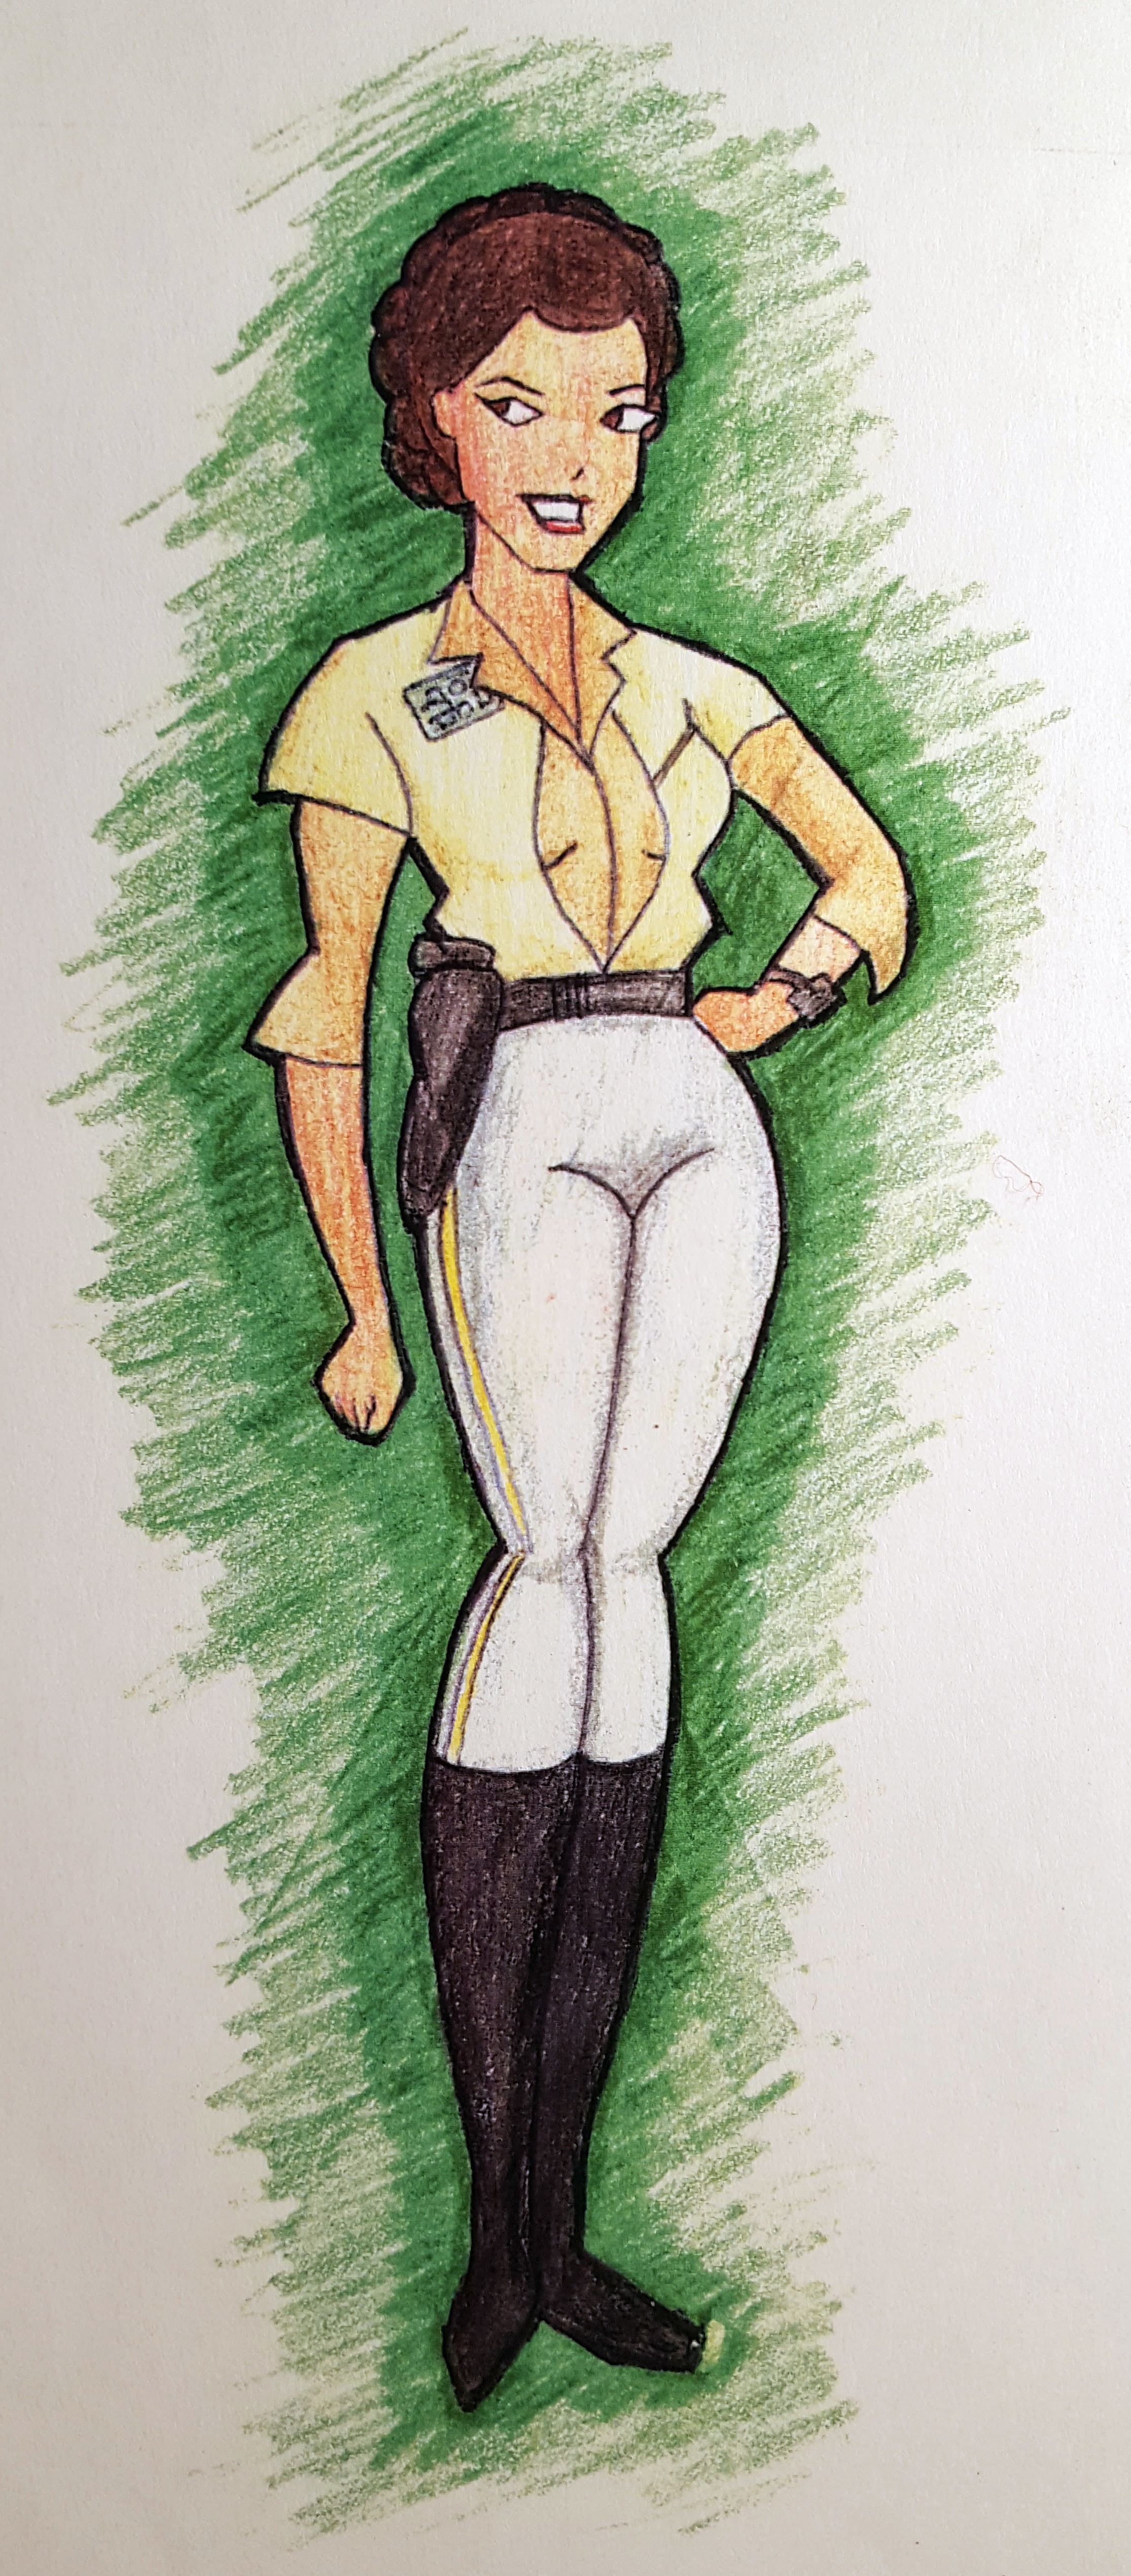 Another envelope; Leia in her commander outfit.